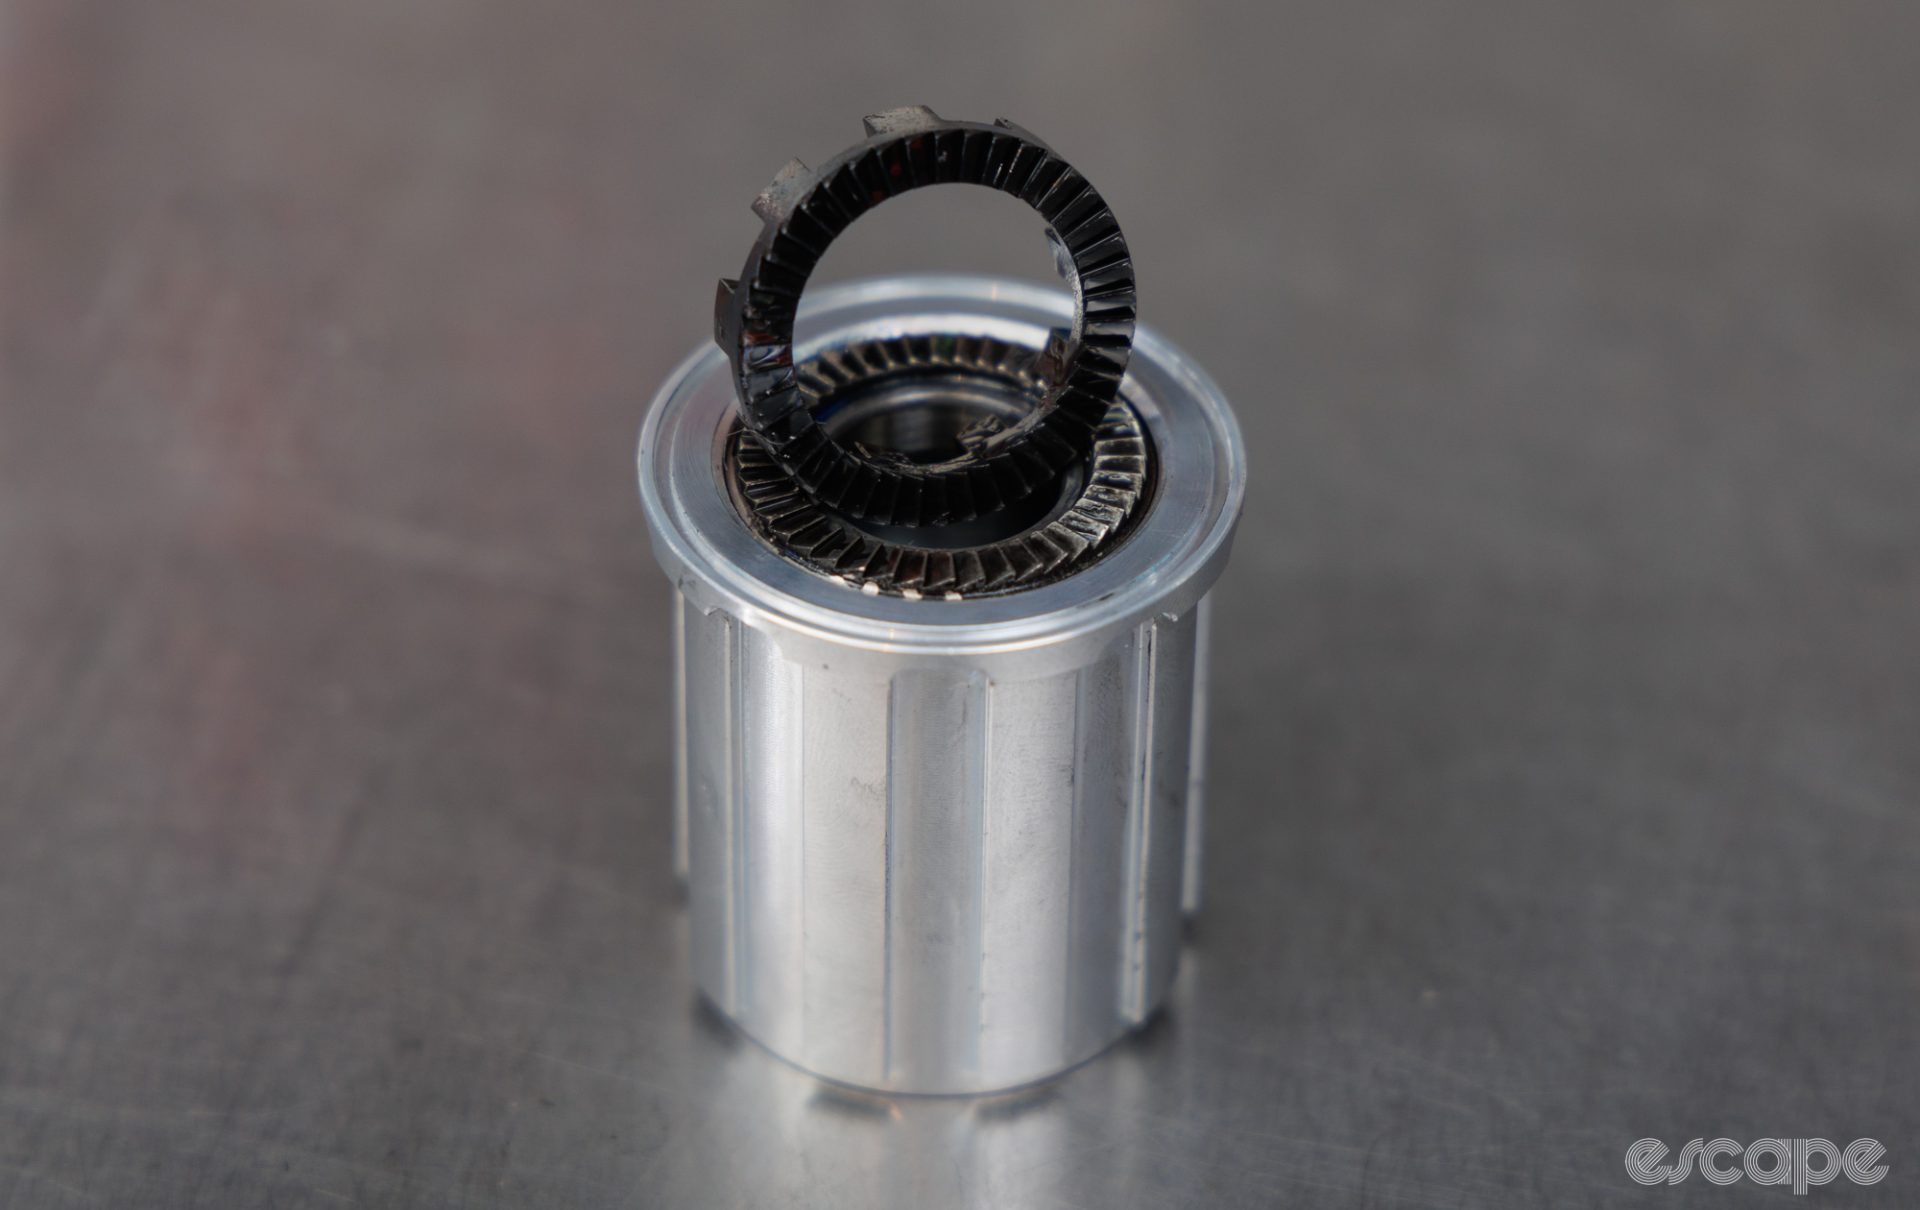 The Partington MKII freehub ratchet ring, with both sides of the ratchet teeth visible. 